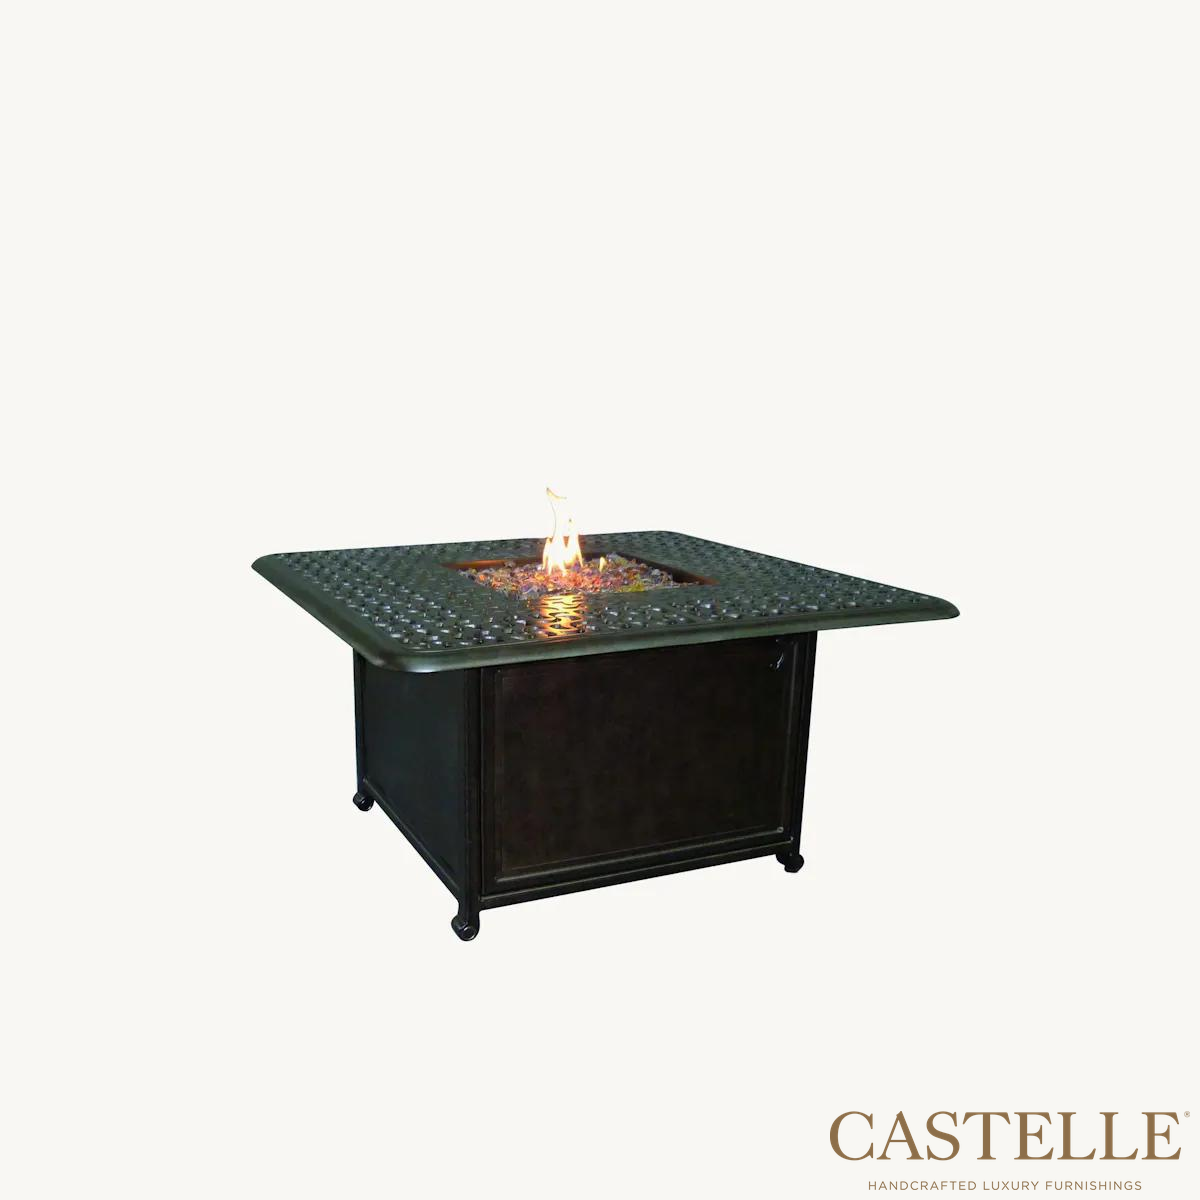 42" Sienna Square Coffee Table With Firepit